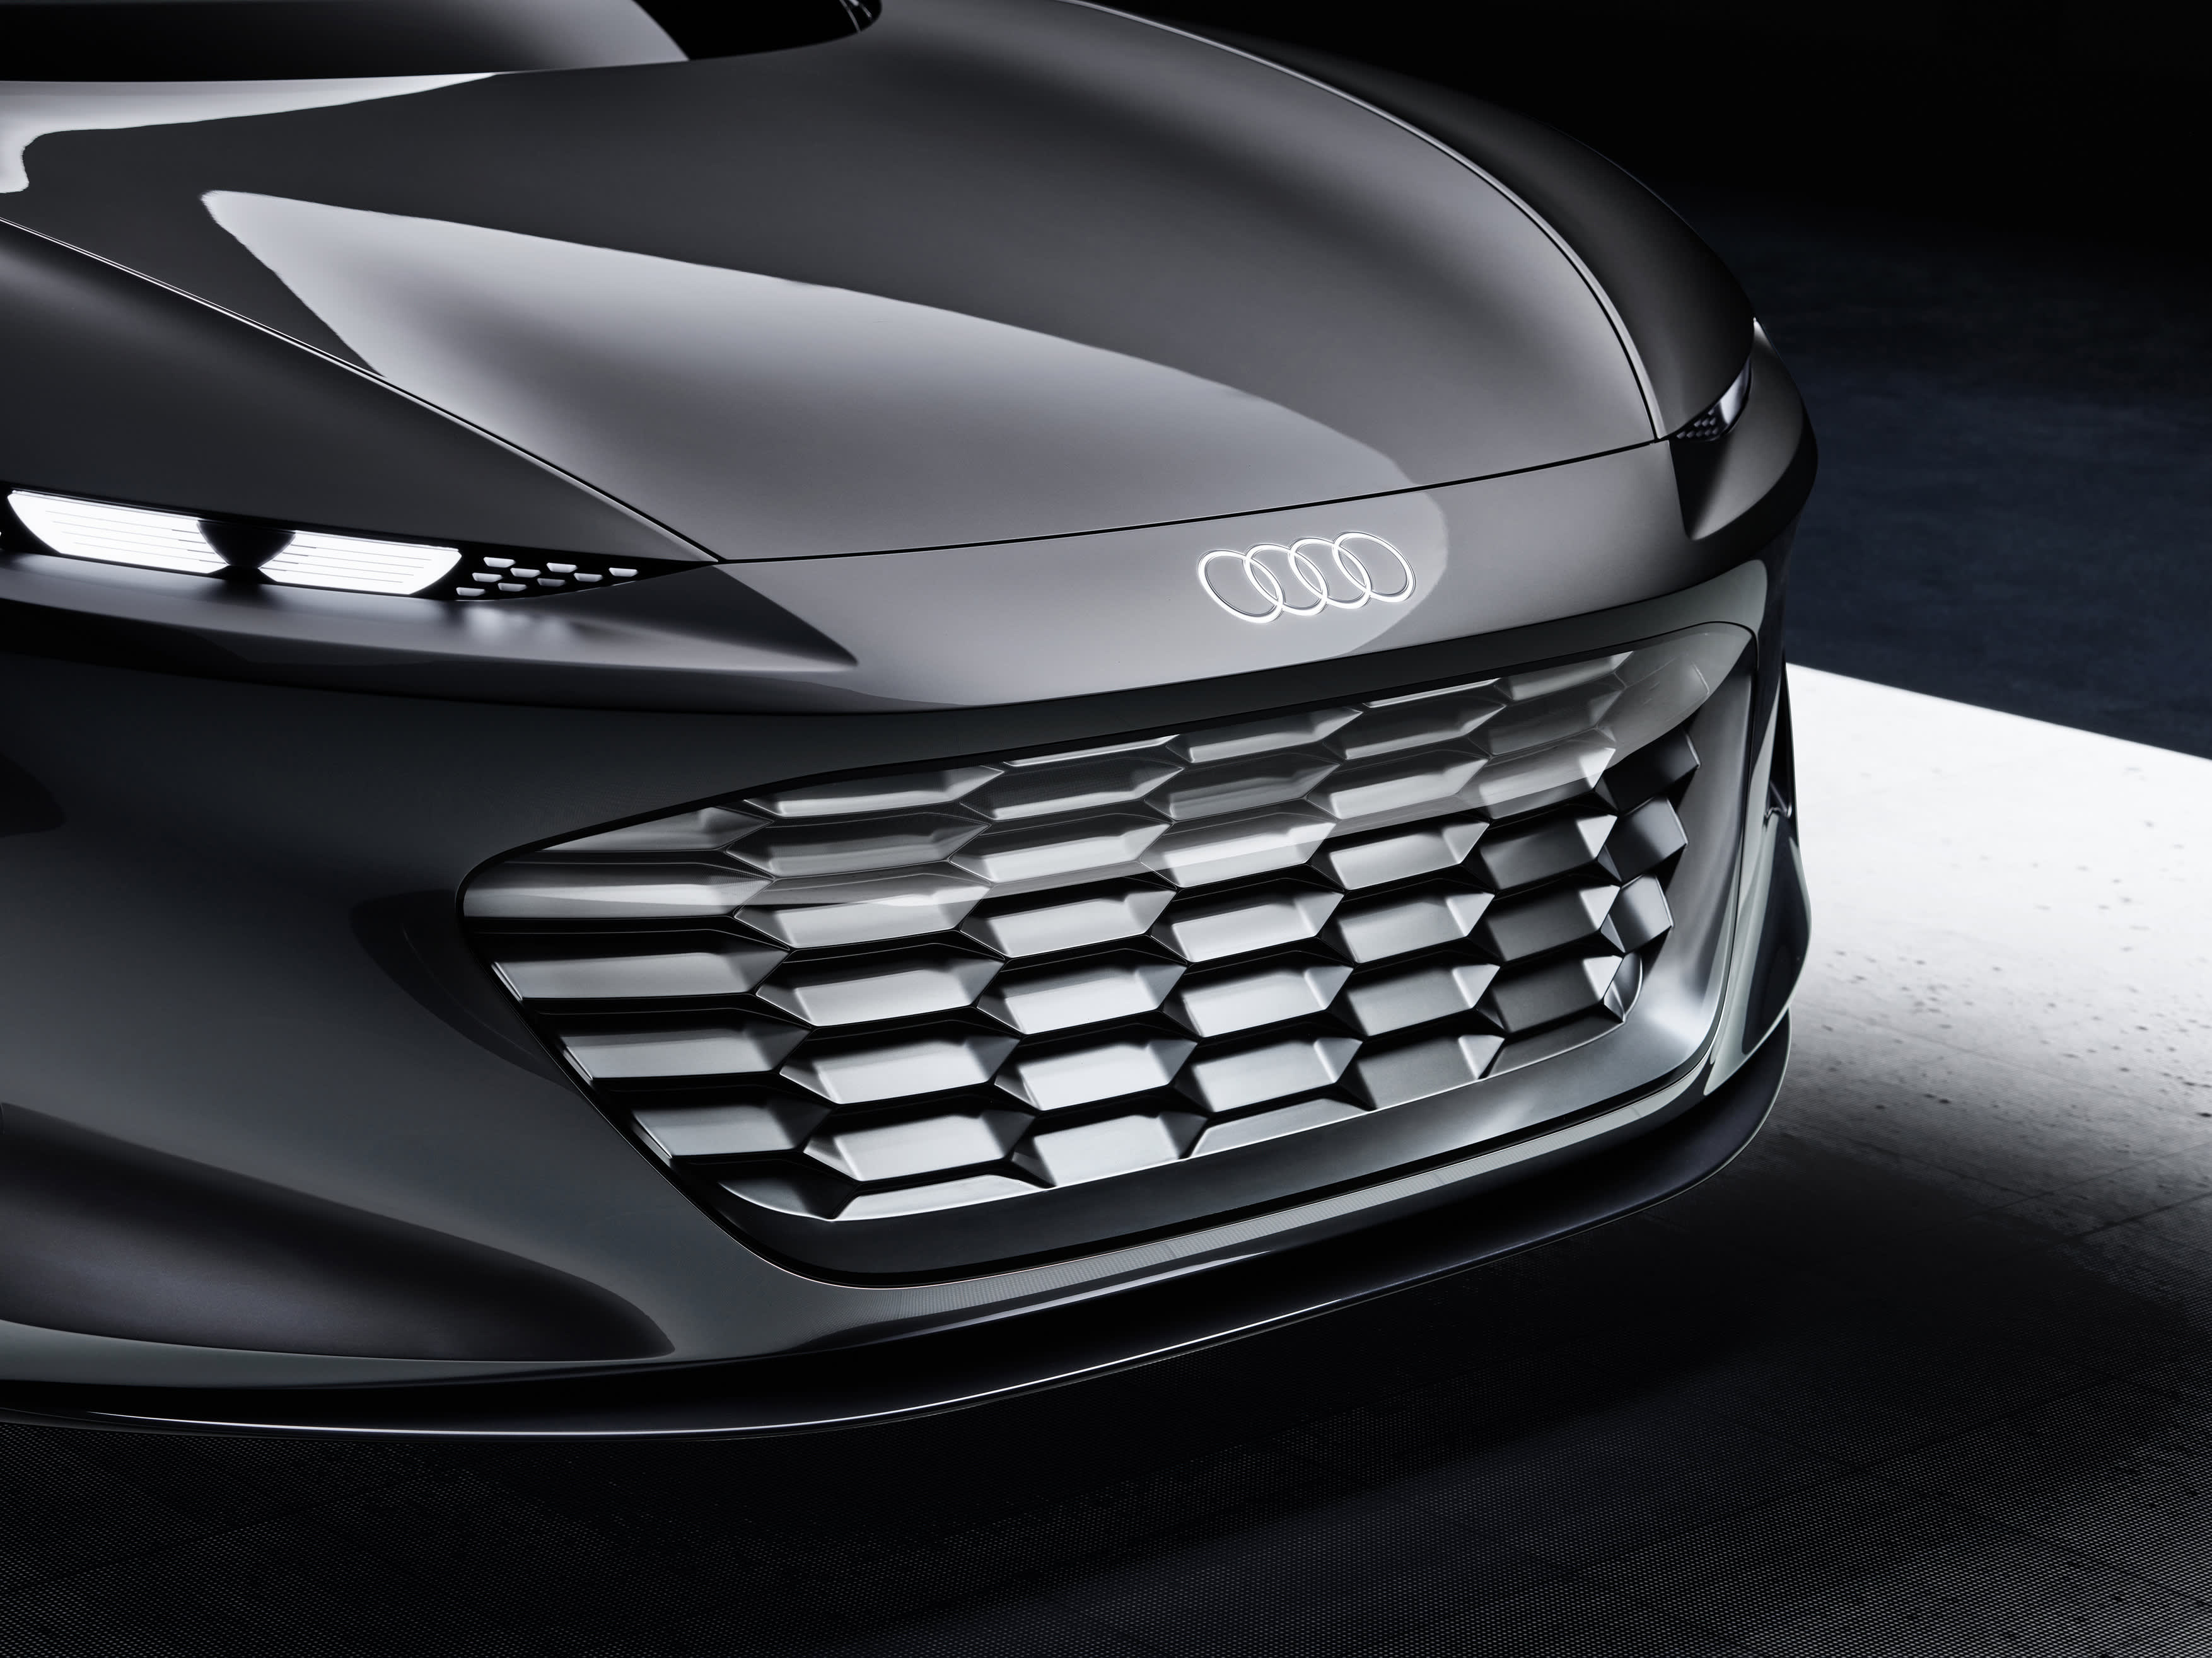 Audi unveils Grandsphere concept car as a 'private jet for the road'